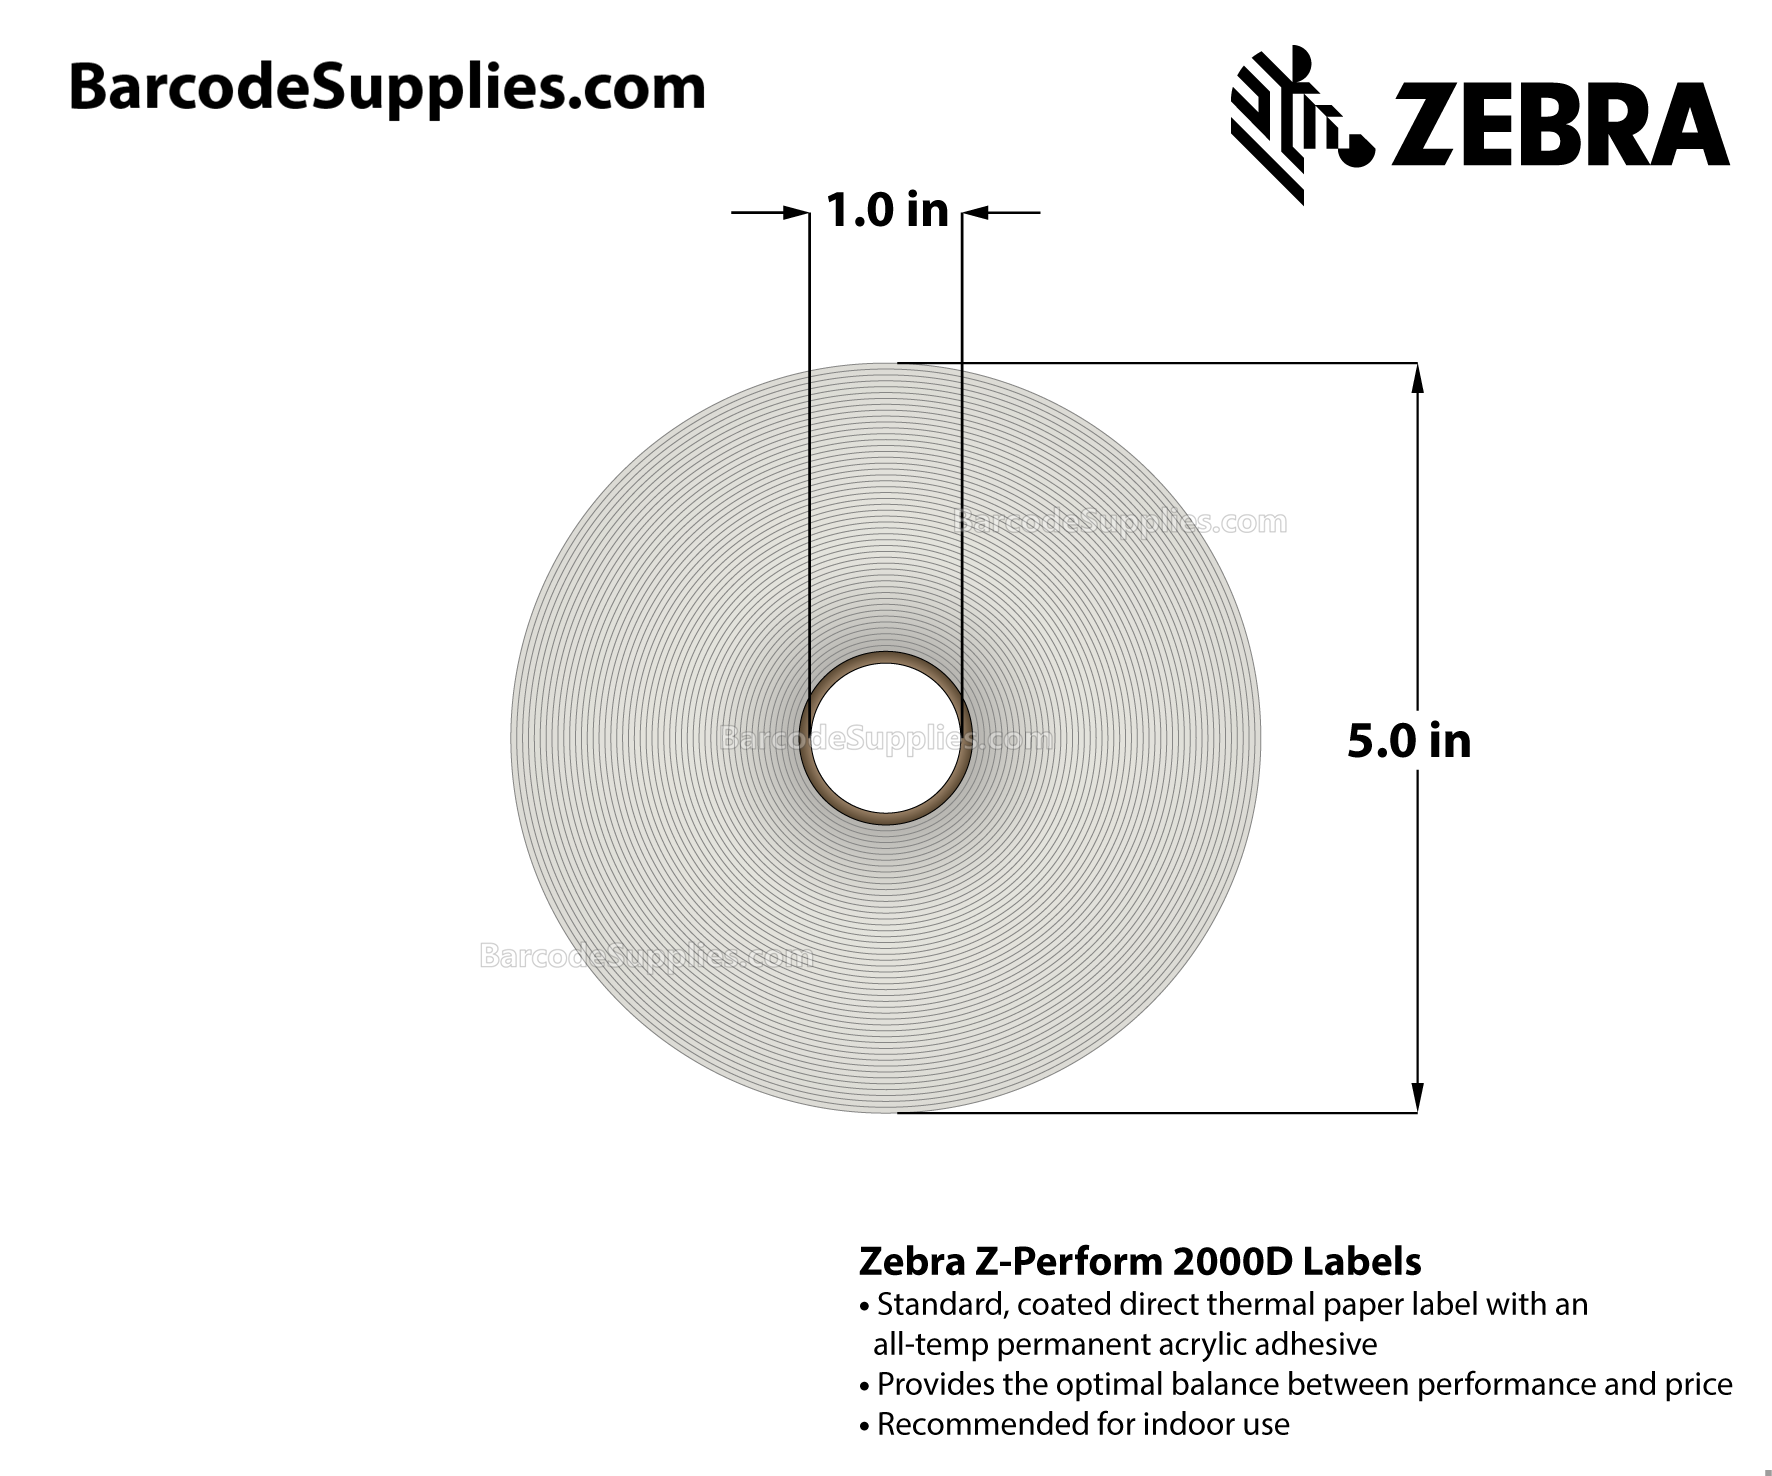 3 x 1 Direct Thermal White Z-Perform 2000D Labels With All-Temp Adhesive - Perforated - 2340 Labels Per Roll - Carton Of 6 Rolls - 14040 Labels Total - MPN: 10015782